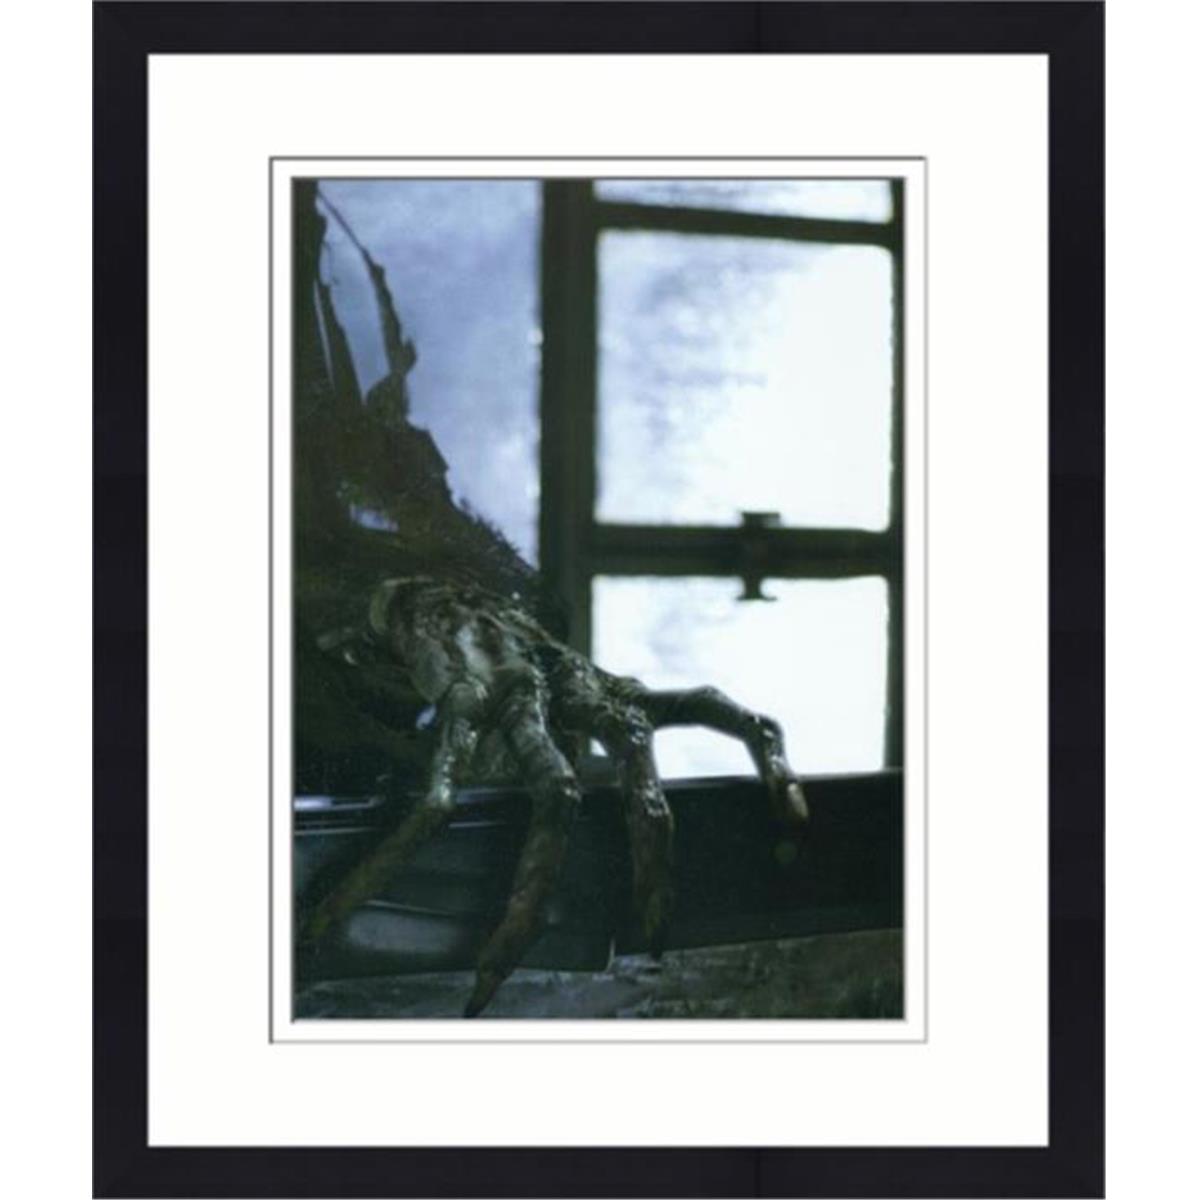 559846 8 x 10 in. Dementor Hand Matted & Framed Photo - Harry Potter No.9 -  Autograph Warehouse